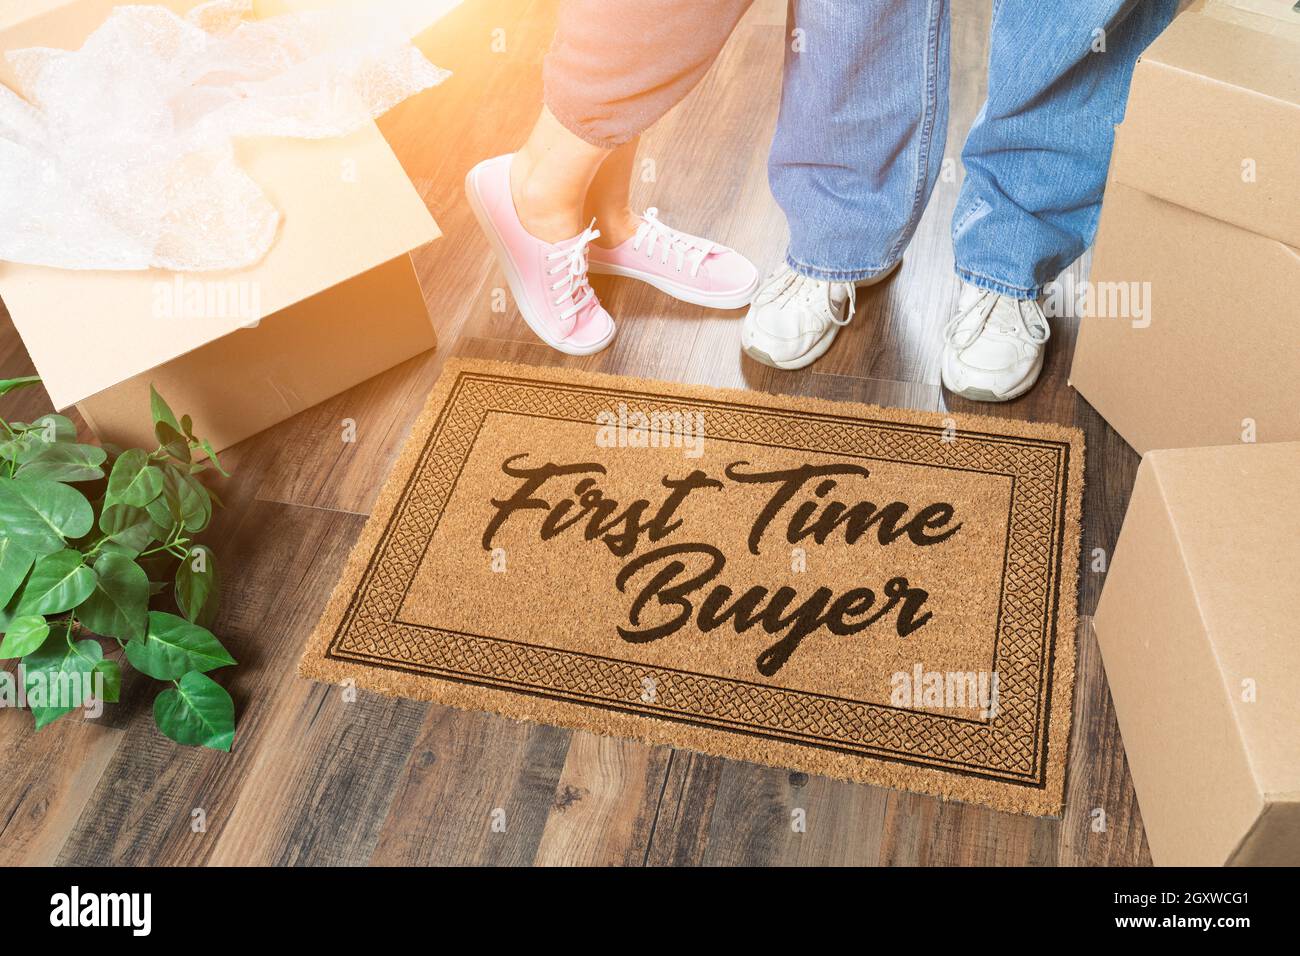 Man and Woman Unpacking Near Our First Time Buyer Welcome Mat, Moving Boxes and Plant. Stock Photo